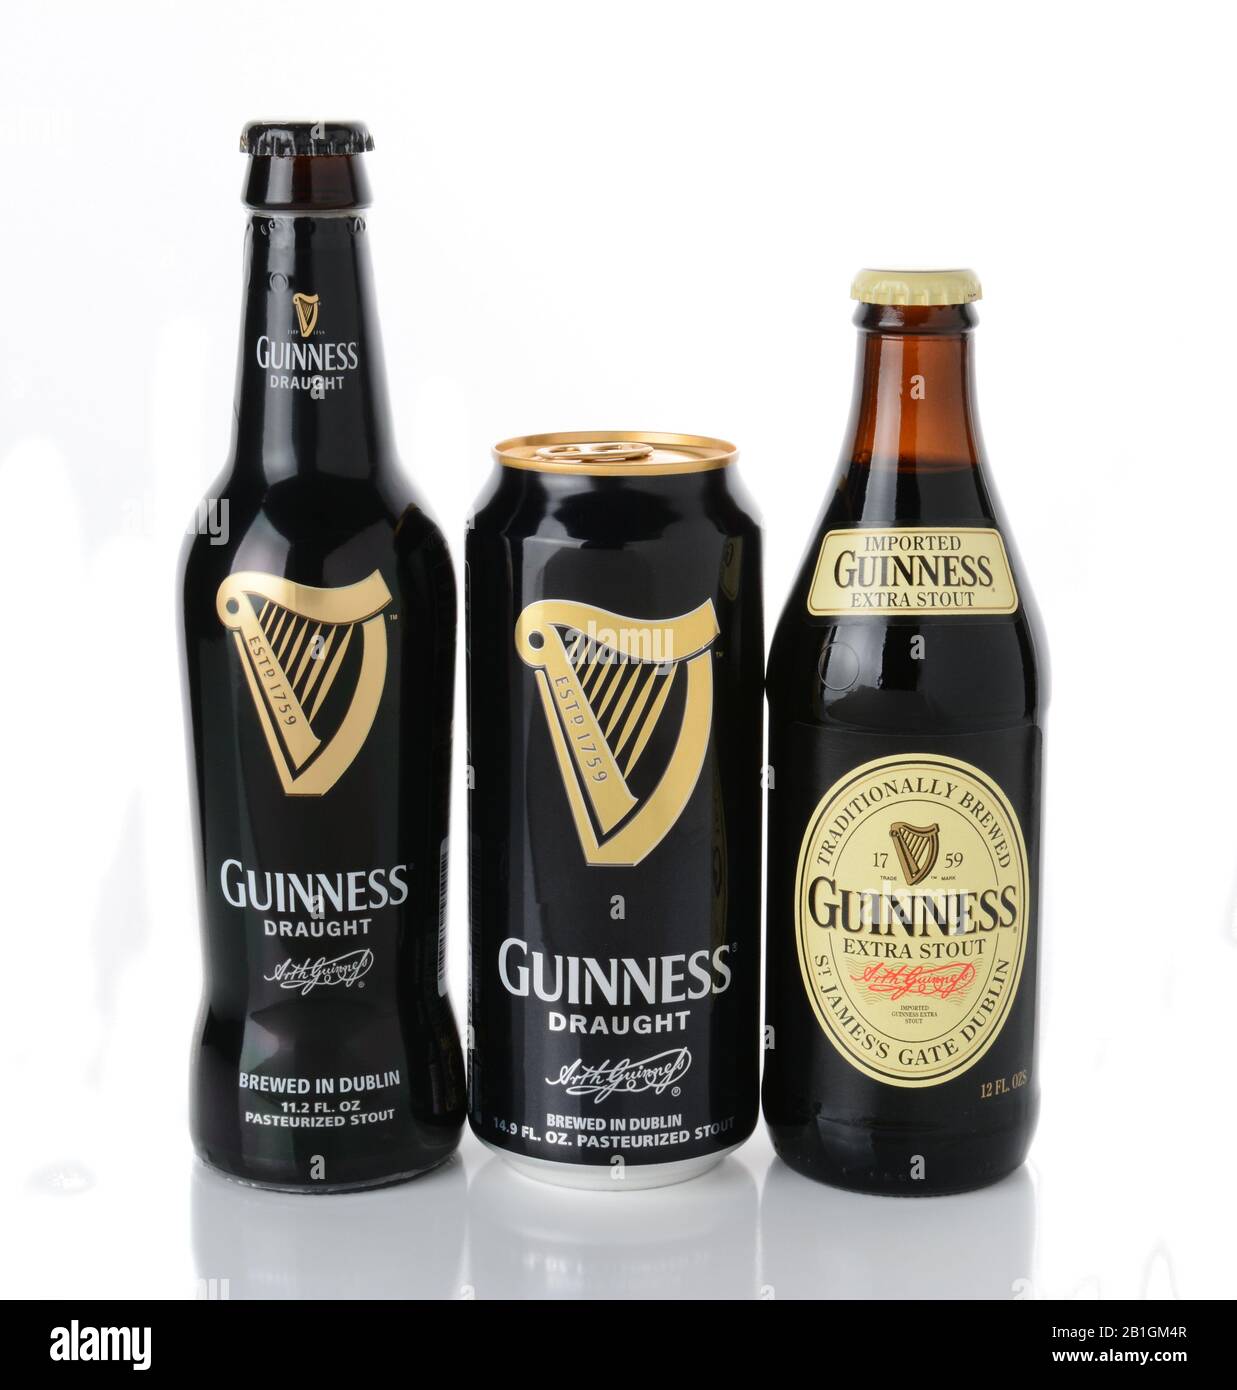 IRVINE, CA - JANUARY 12, 2015: Three beers from the Guinness Brewing Company, Stout bottle and Draught can and bottle.  Guinness has been producing be Stock Photo